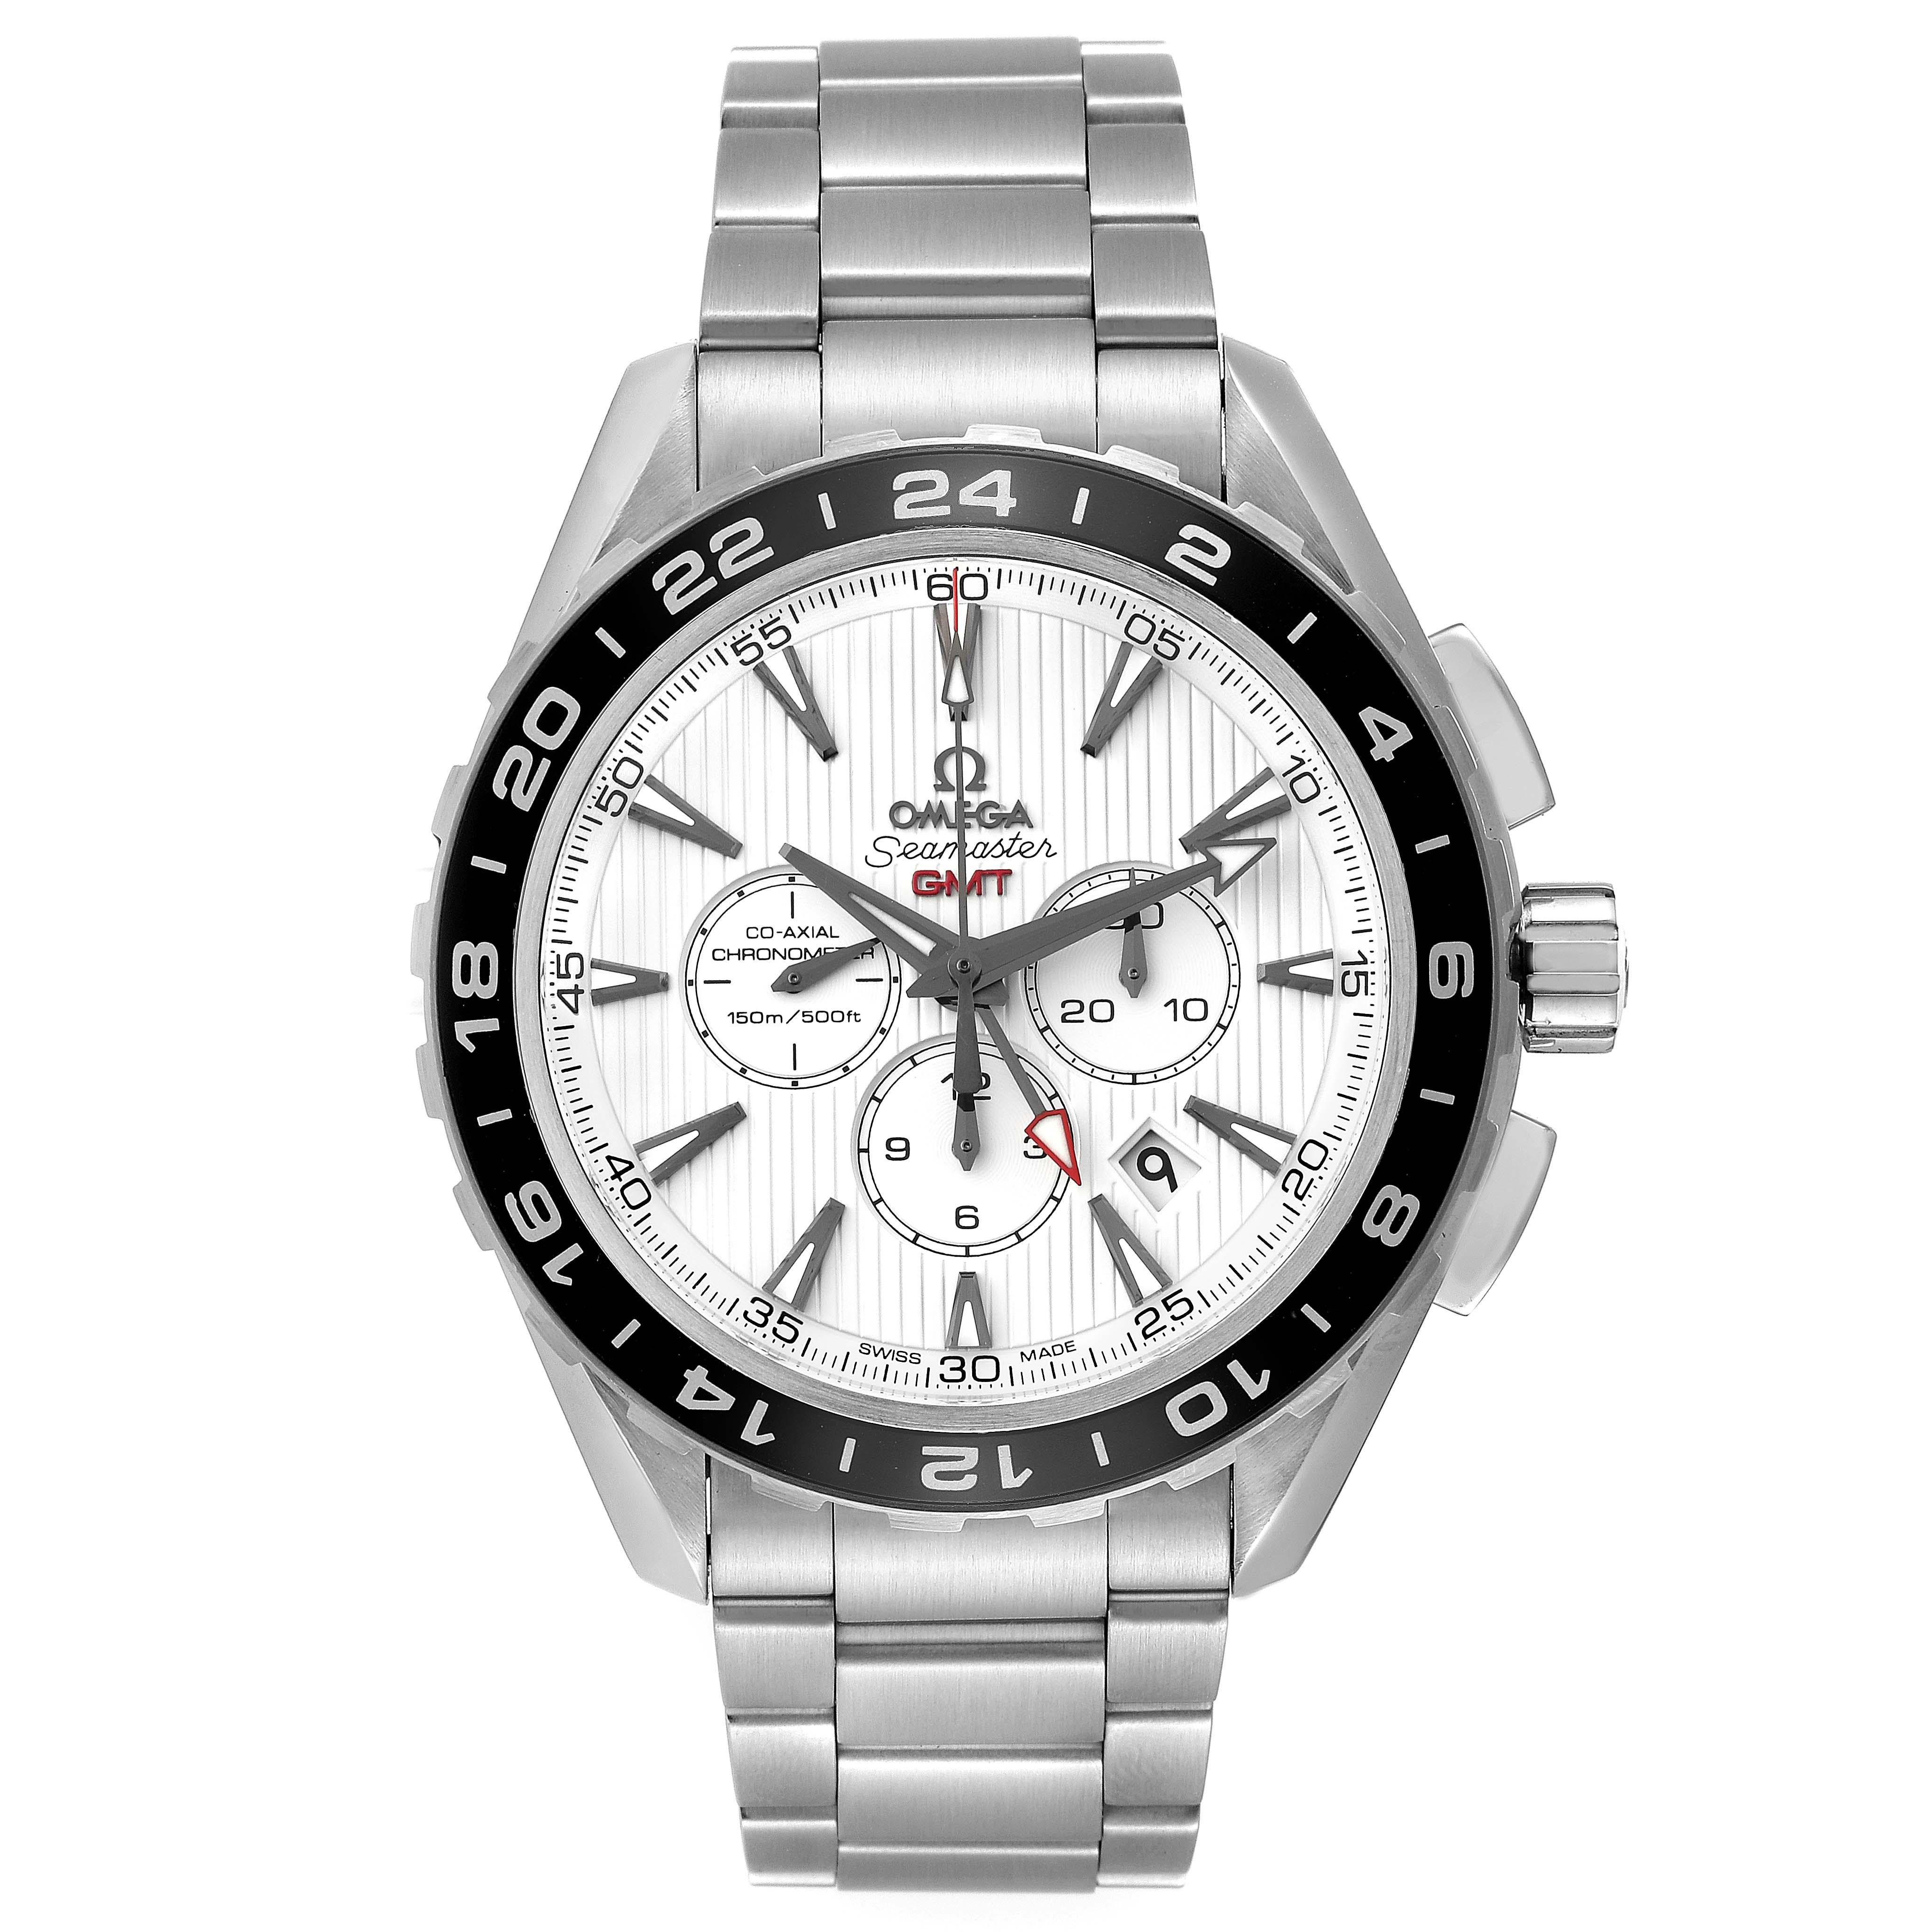 Omega Seamaster GMT Chronograph Steel Mens Watch 231.10.44.52.04.001 Card. Automatic self-winding movement with GMT and chronograph functions. Stainless steel round case 44 mm in diameter. Transparent exhibiton sapphire crystal caseback.